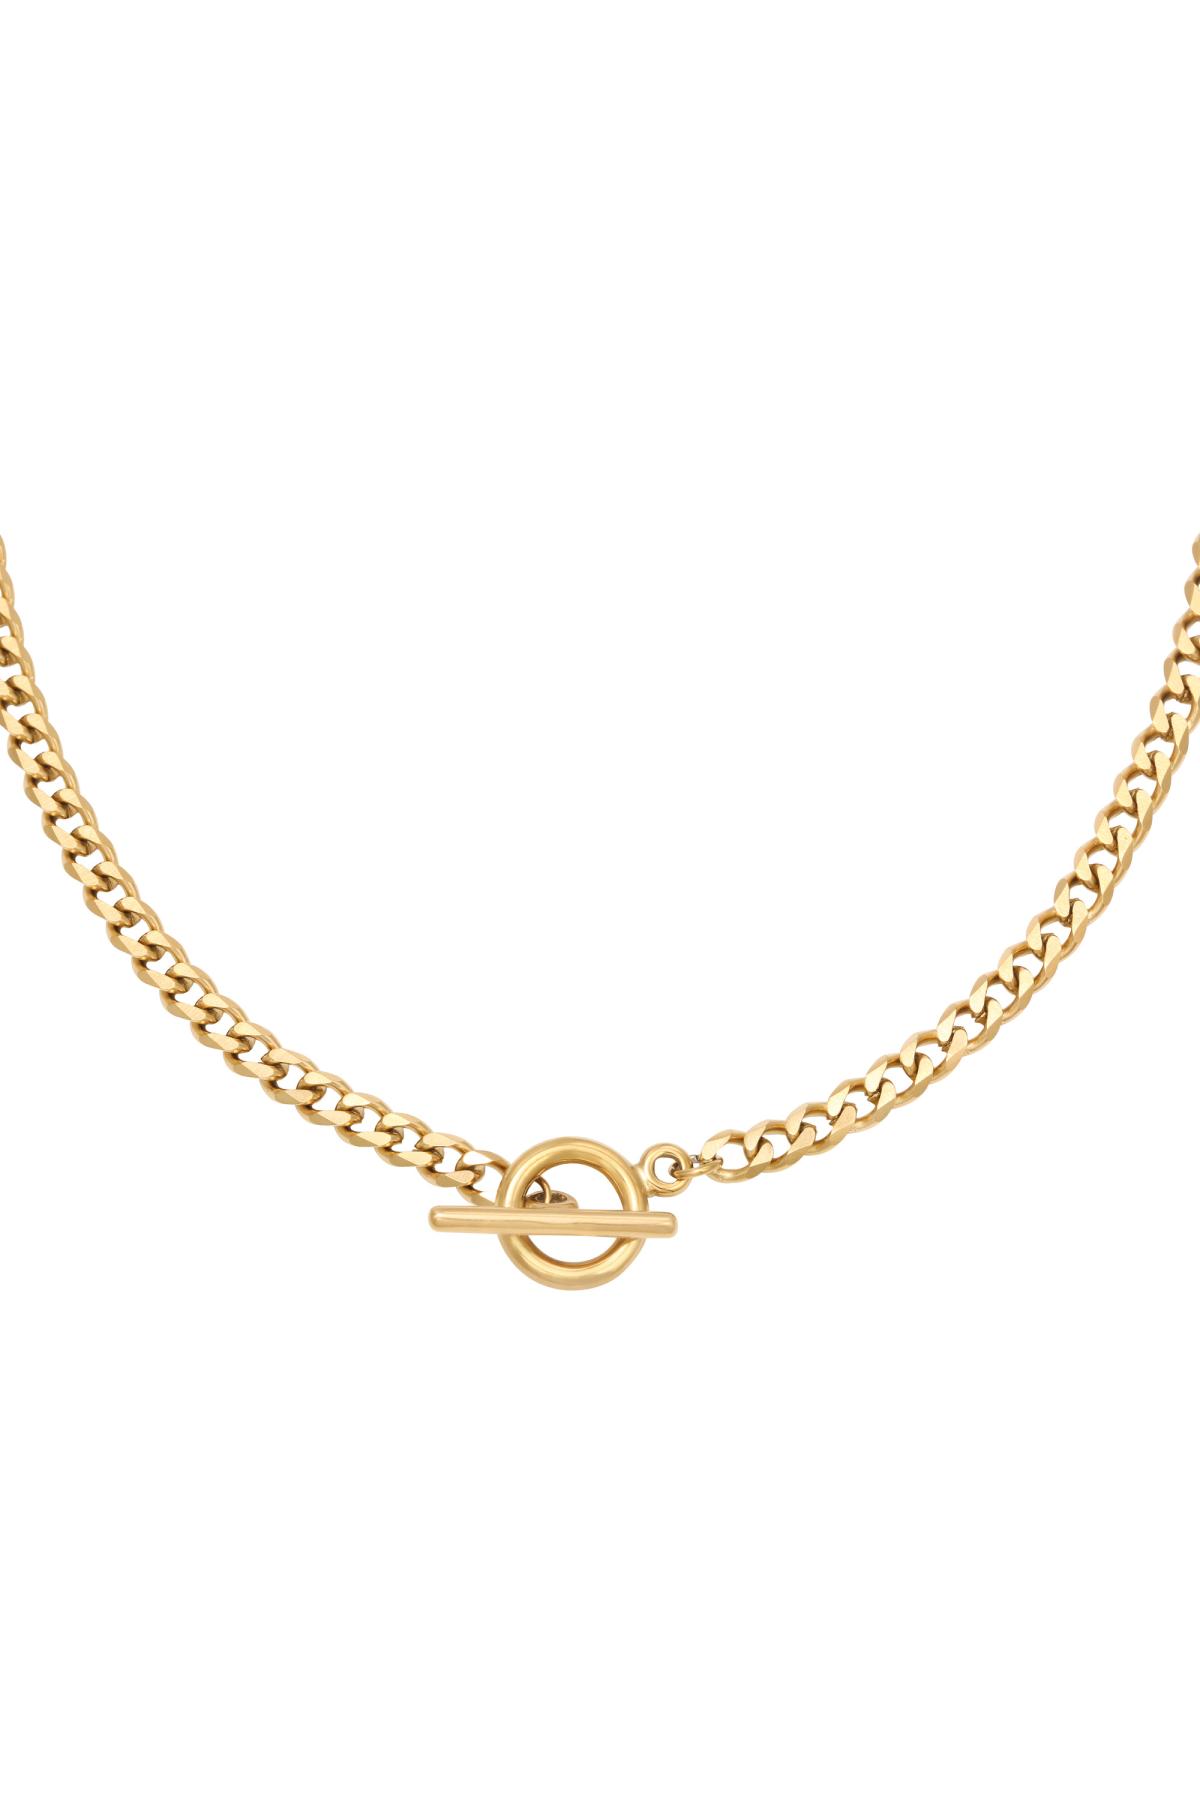 Gold / Necklace Chain Sanya Gold Stainless Steel 